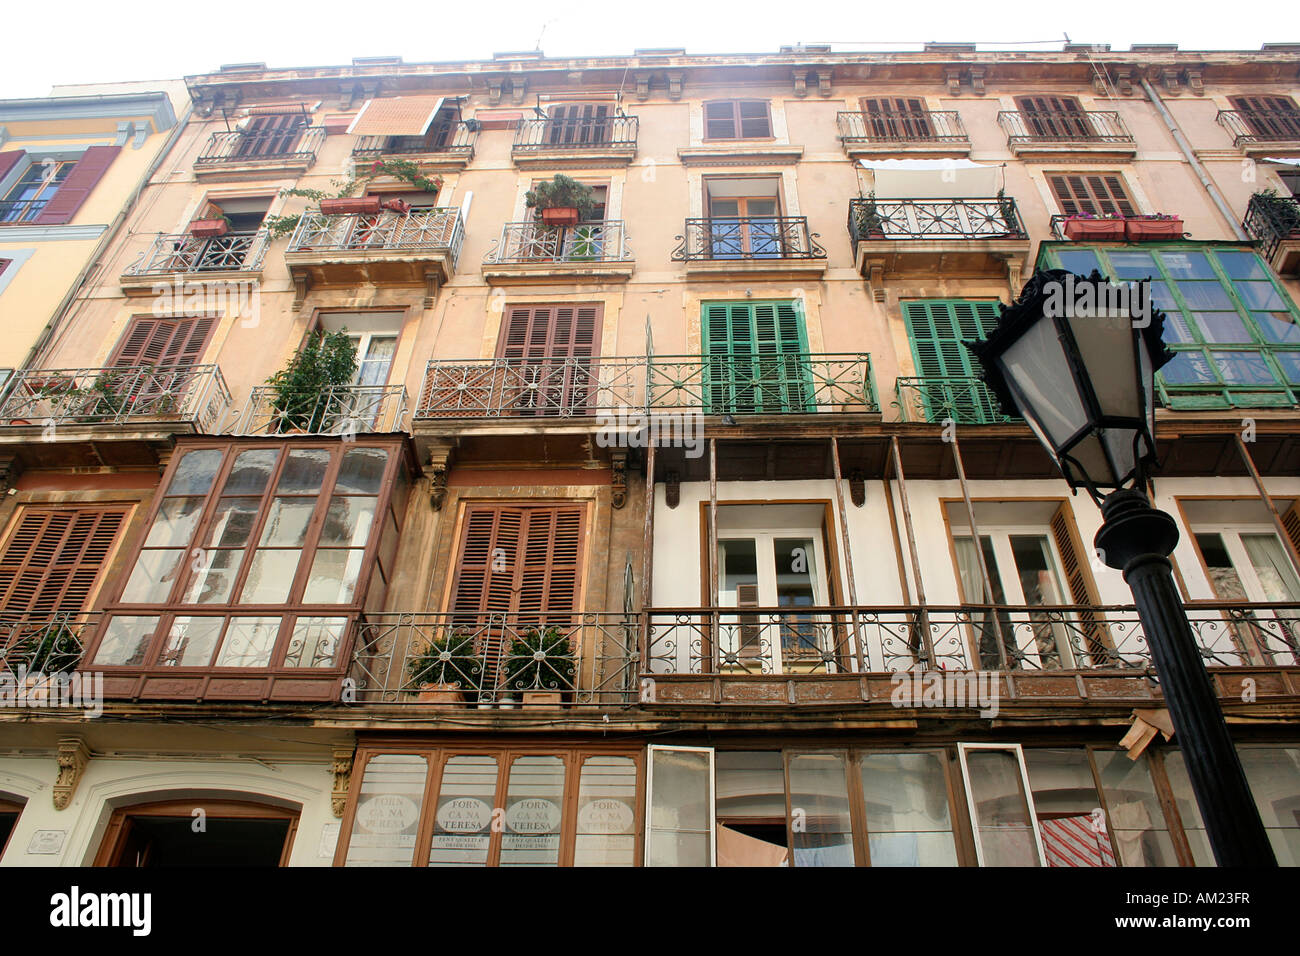 Buildings in the historical old town, Palma, Mallorca, Spain Stock Photo